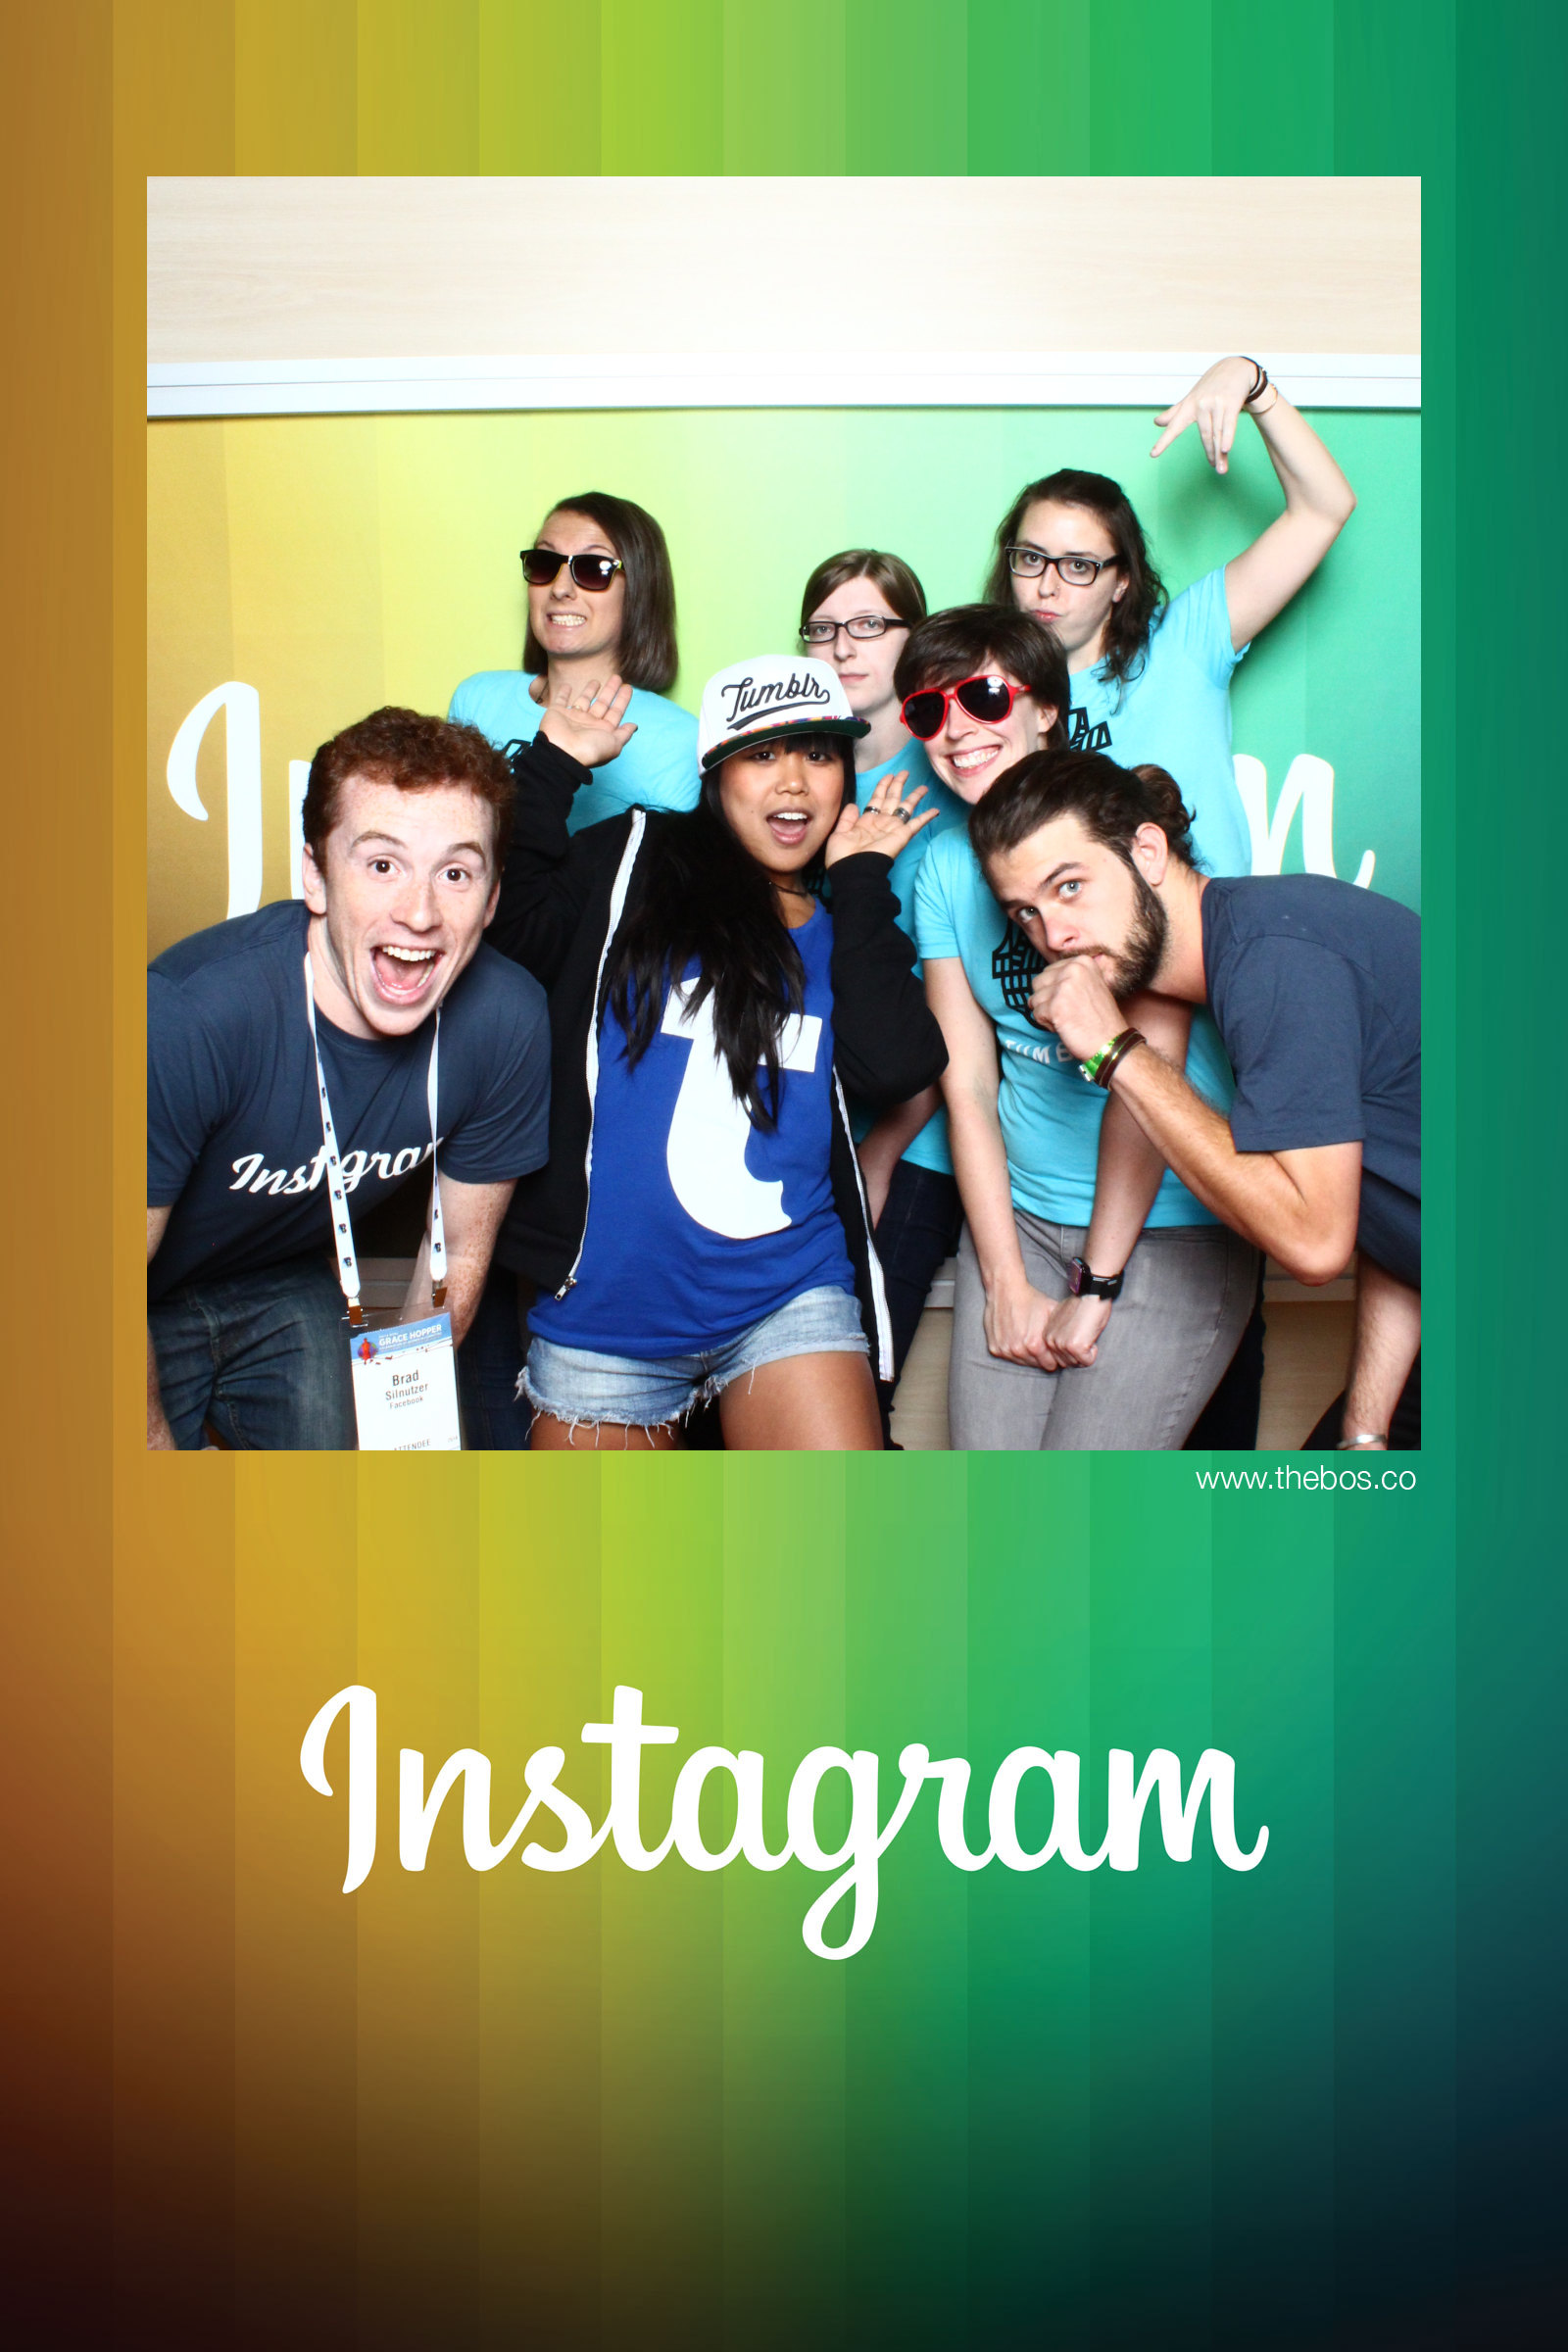 Just hanging with my fellow Tumblr ladies and the guys working the Instagram booth